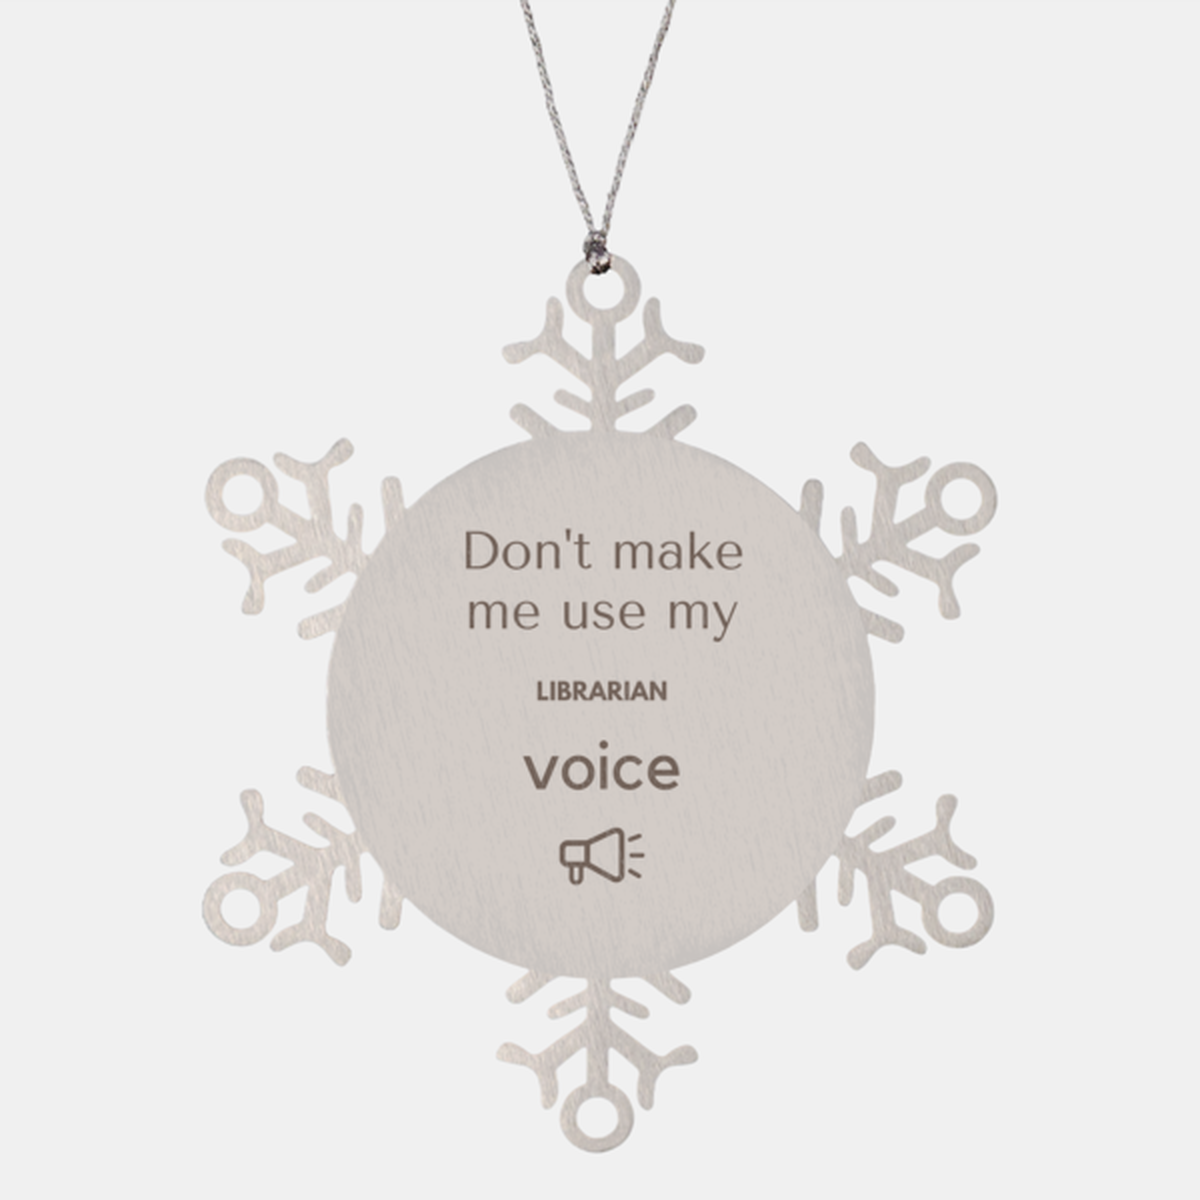 Don't make me use my Librarian voice, Sarcasm Librarian Ornament Gifts, Christmas Librarian Snowflake Ornament Unique Gifts For Librarian Coworkers, Men, Women, Colleague, Friends